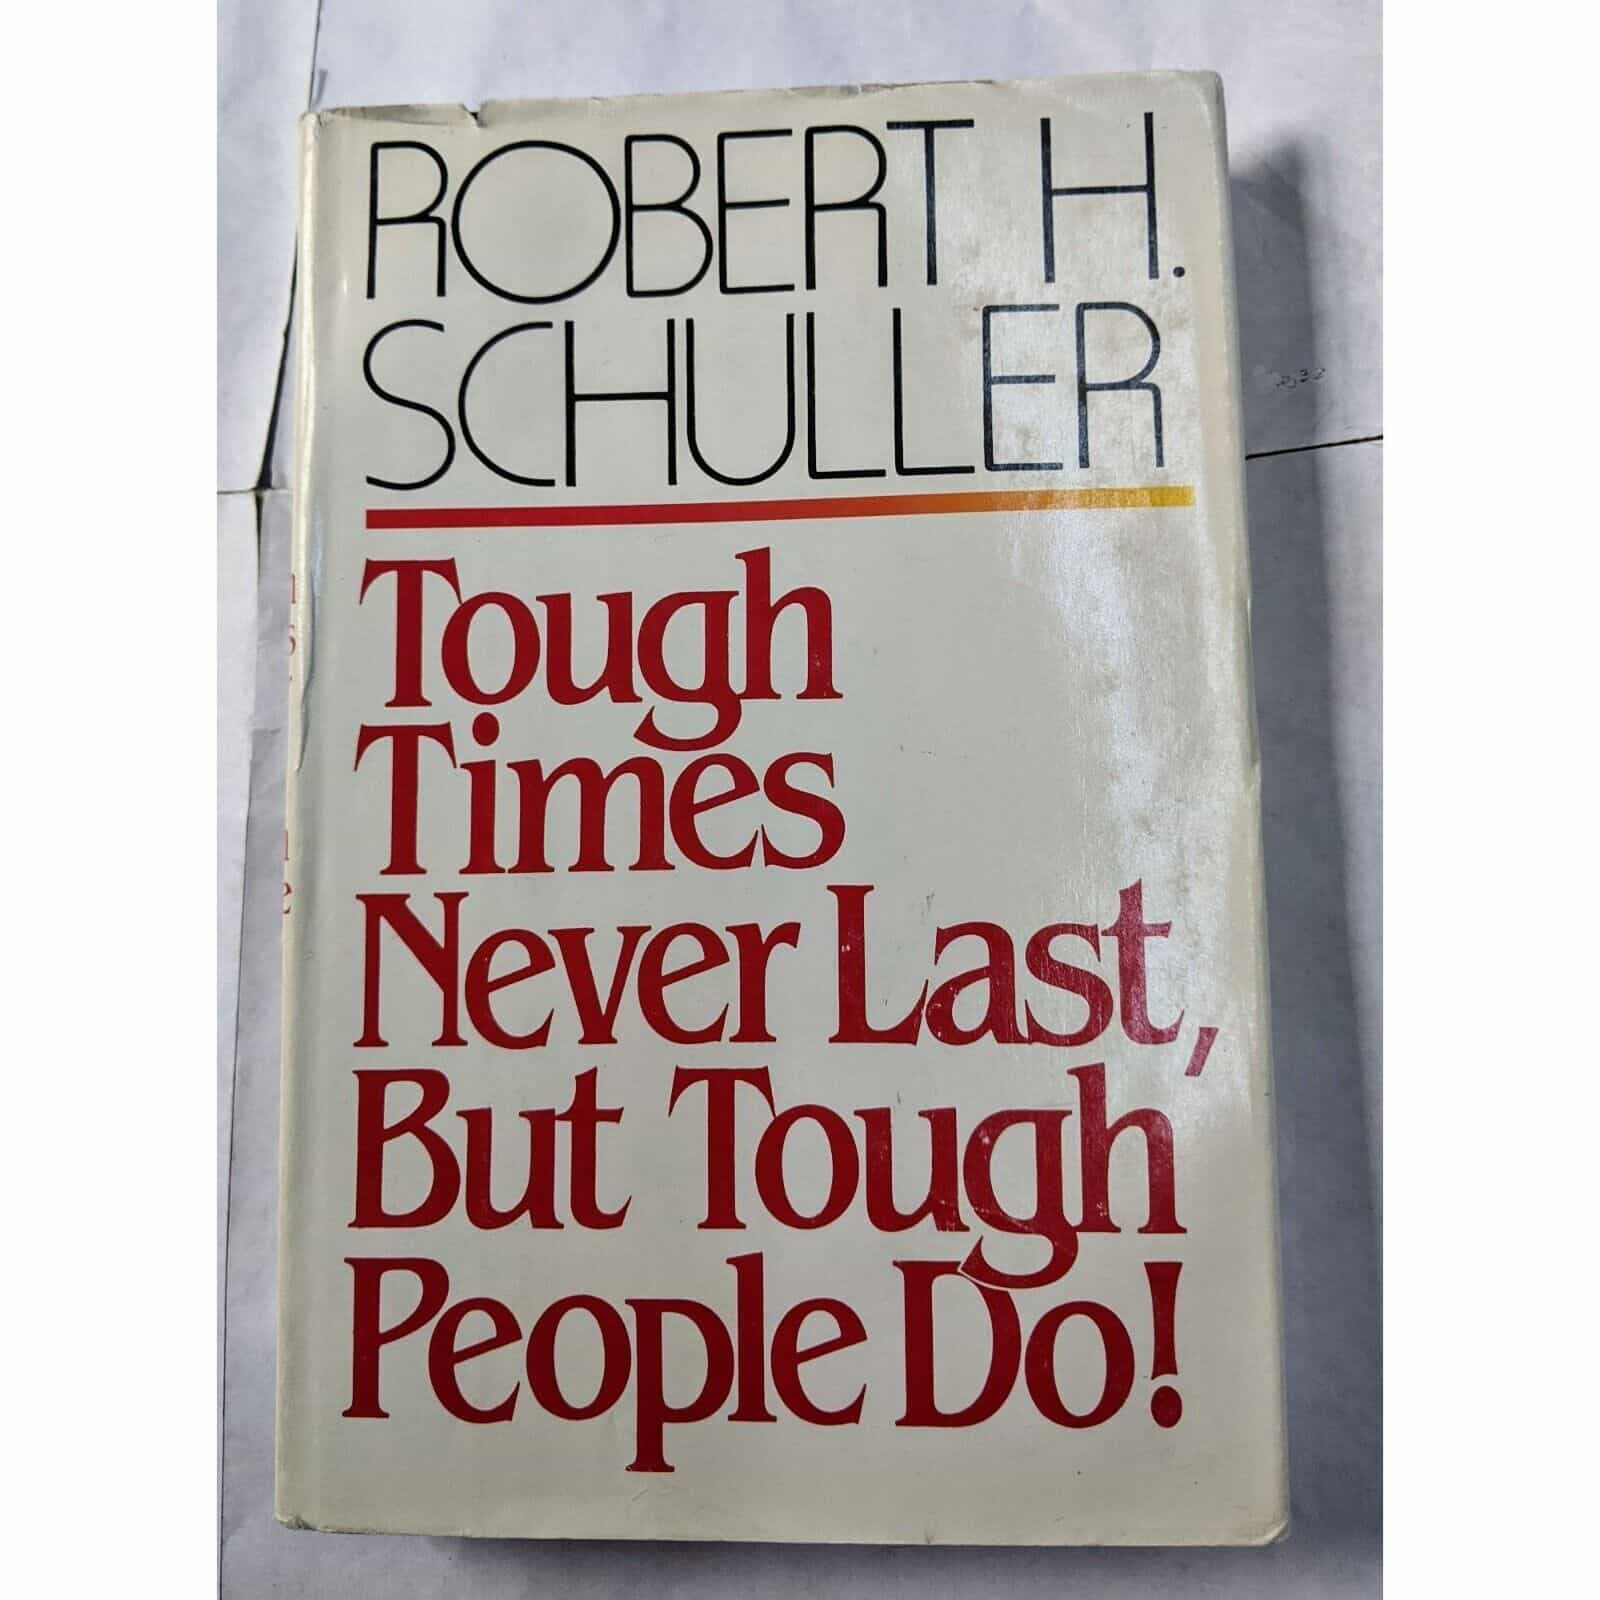 Tough Times Never Last, But Tough People Do! by Robert H. Schuller Book